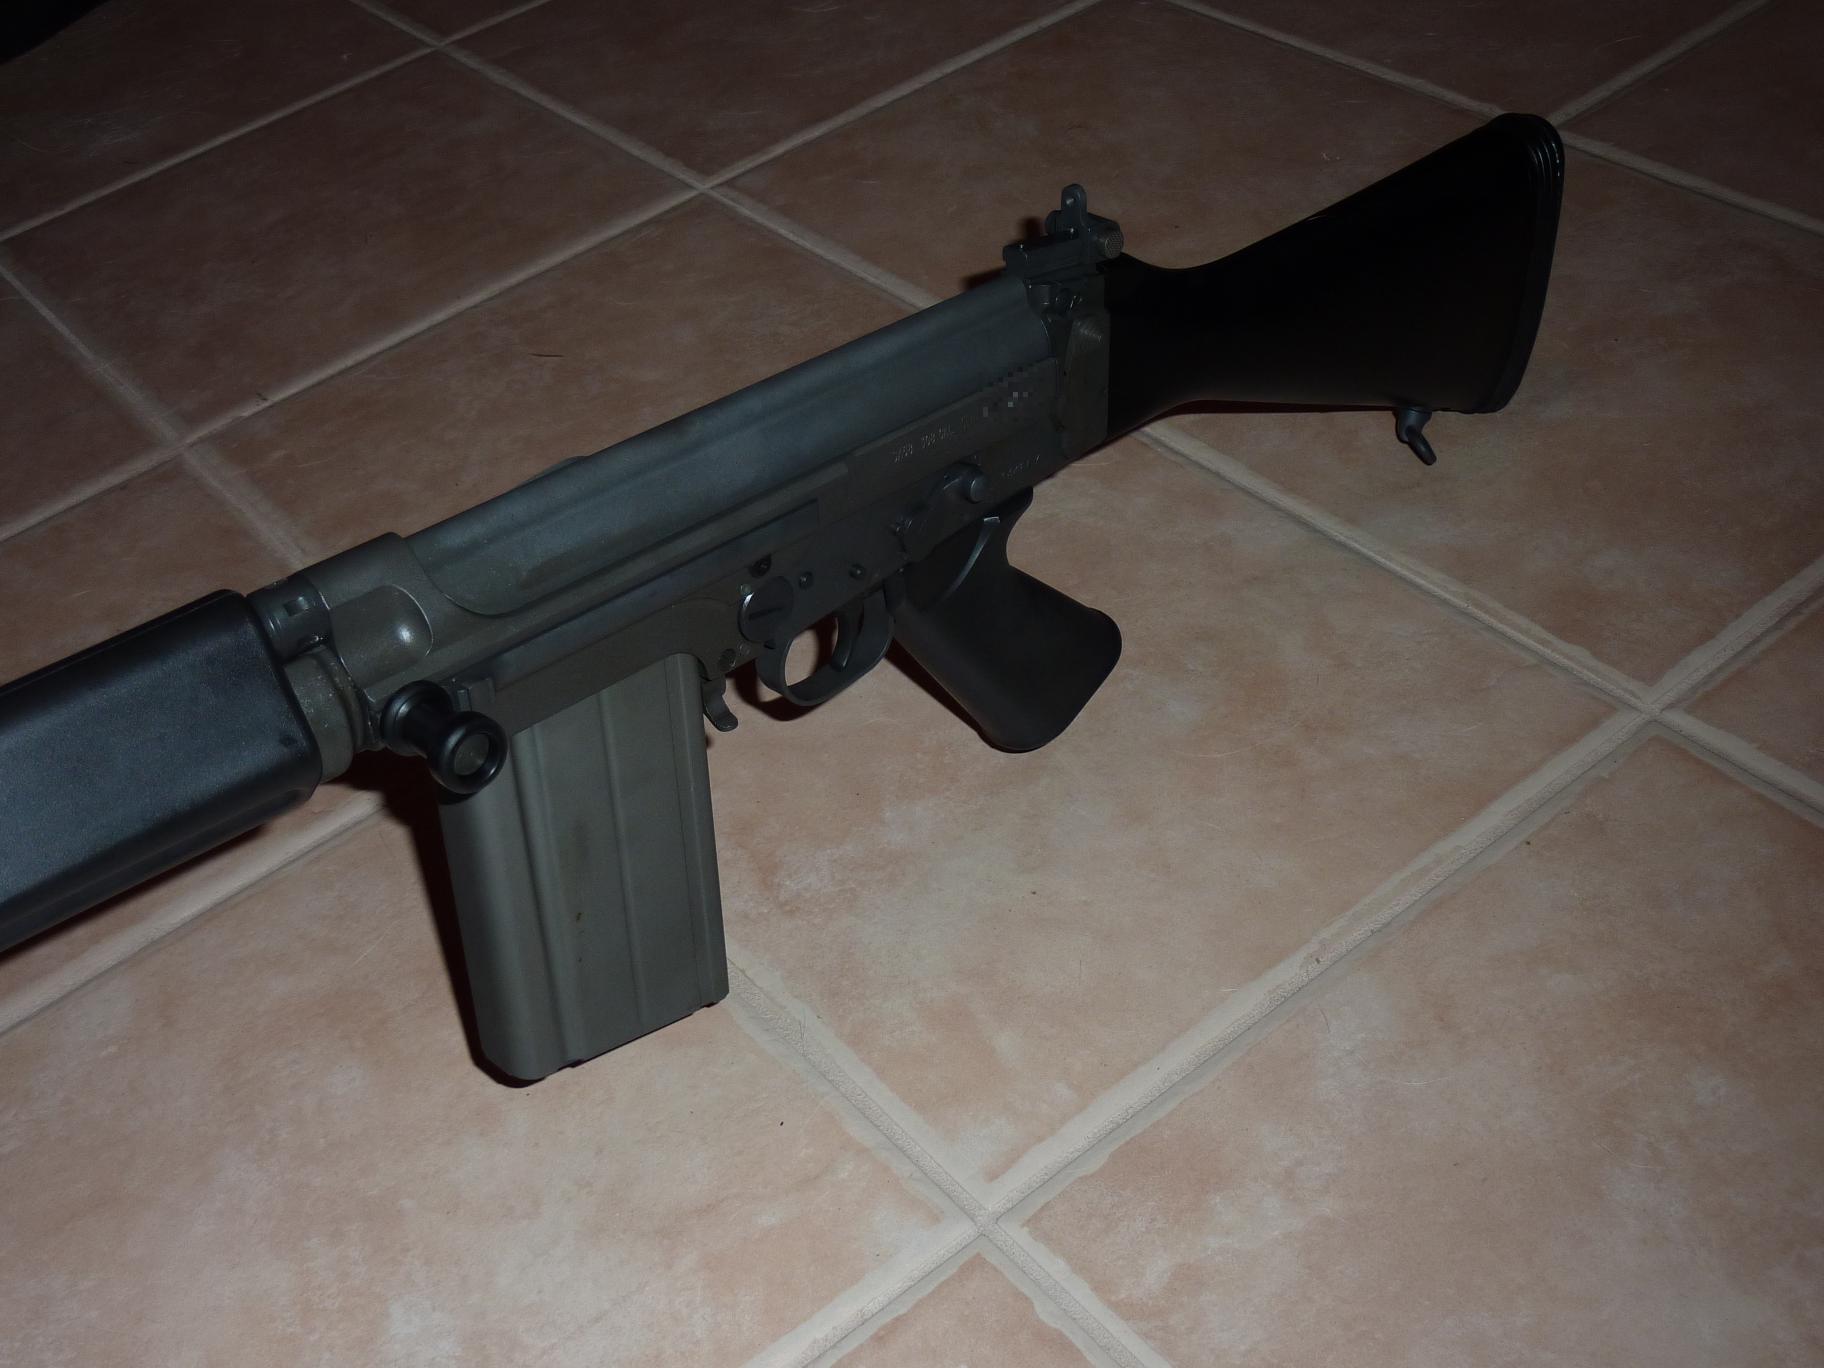 FN FAL by DS Arms || DMC-ZS3@6.5 | 1/30s | f3.6 | ISO100 || 2010-04-17 16:14:30